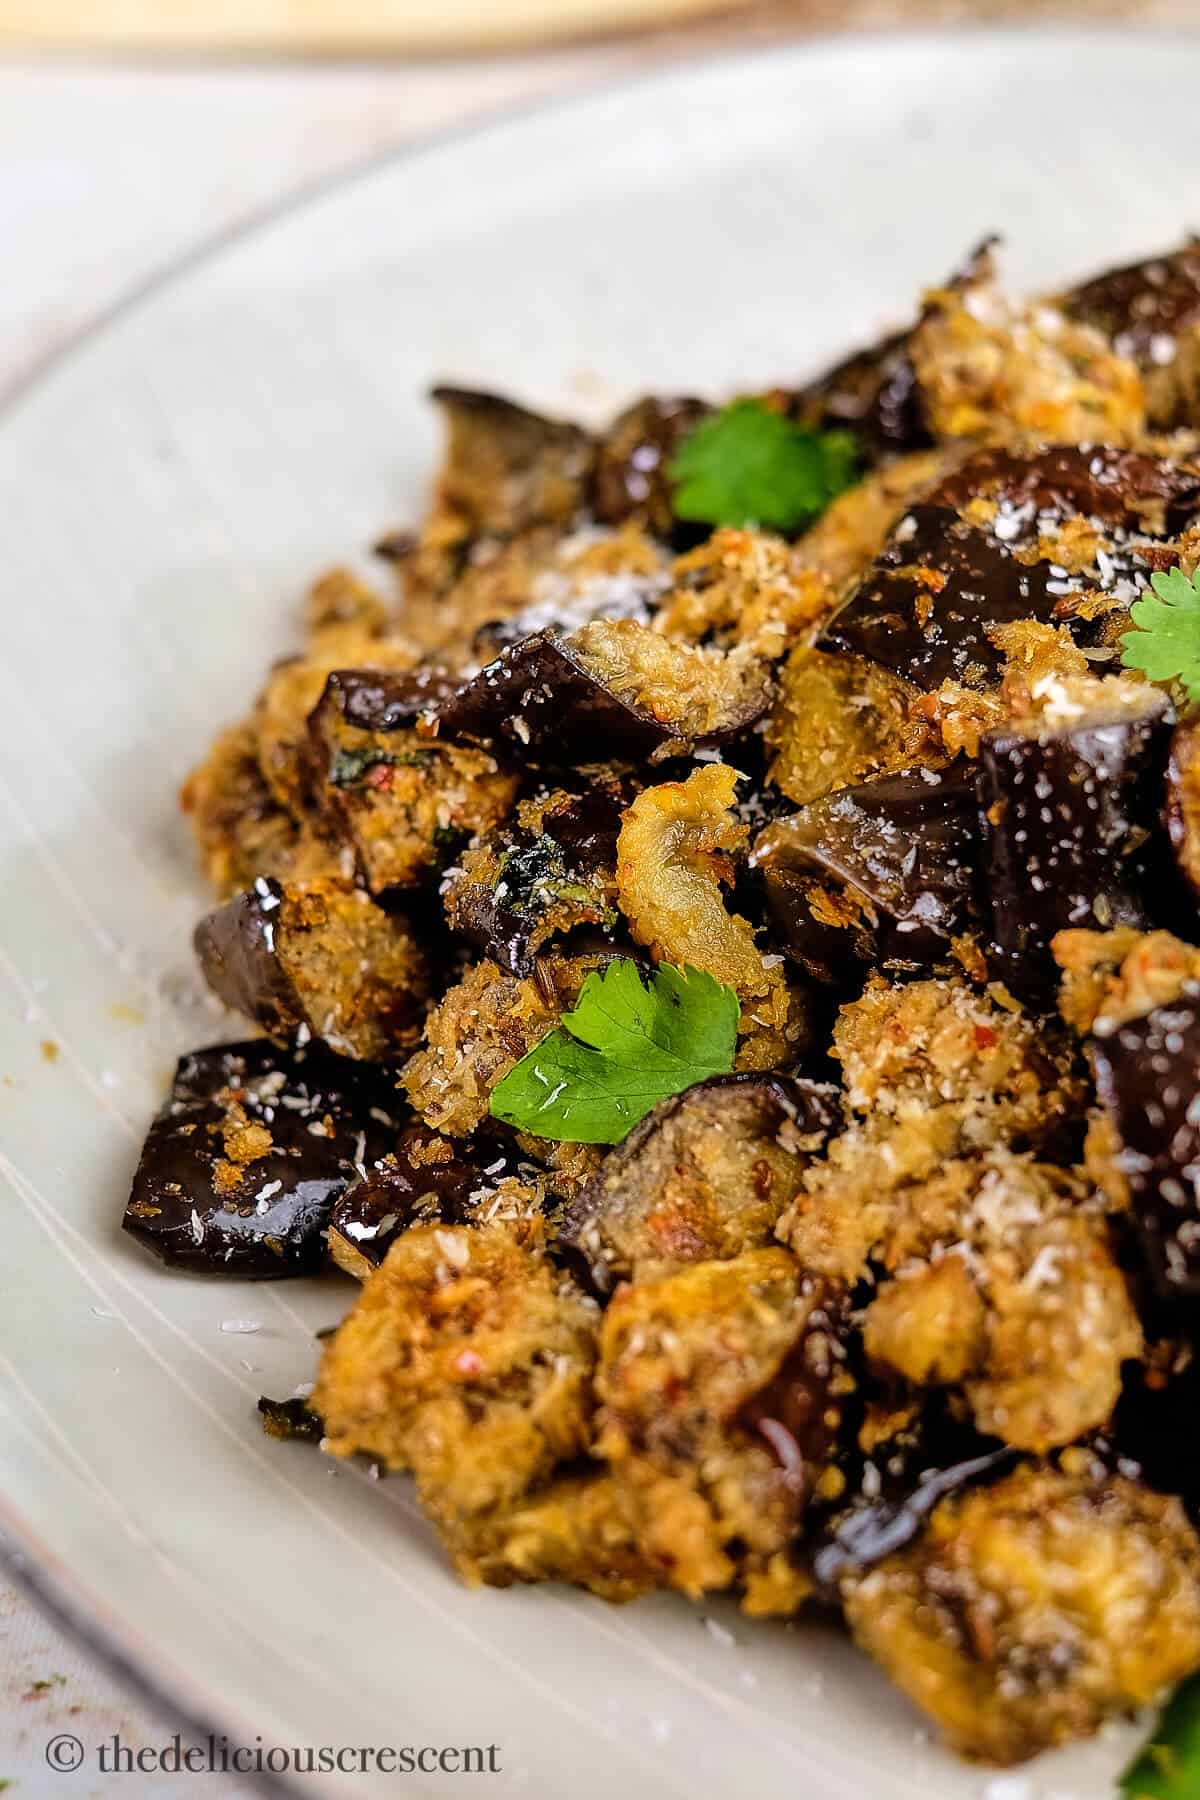 Spicy eggplant side dish served in a white plate.